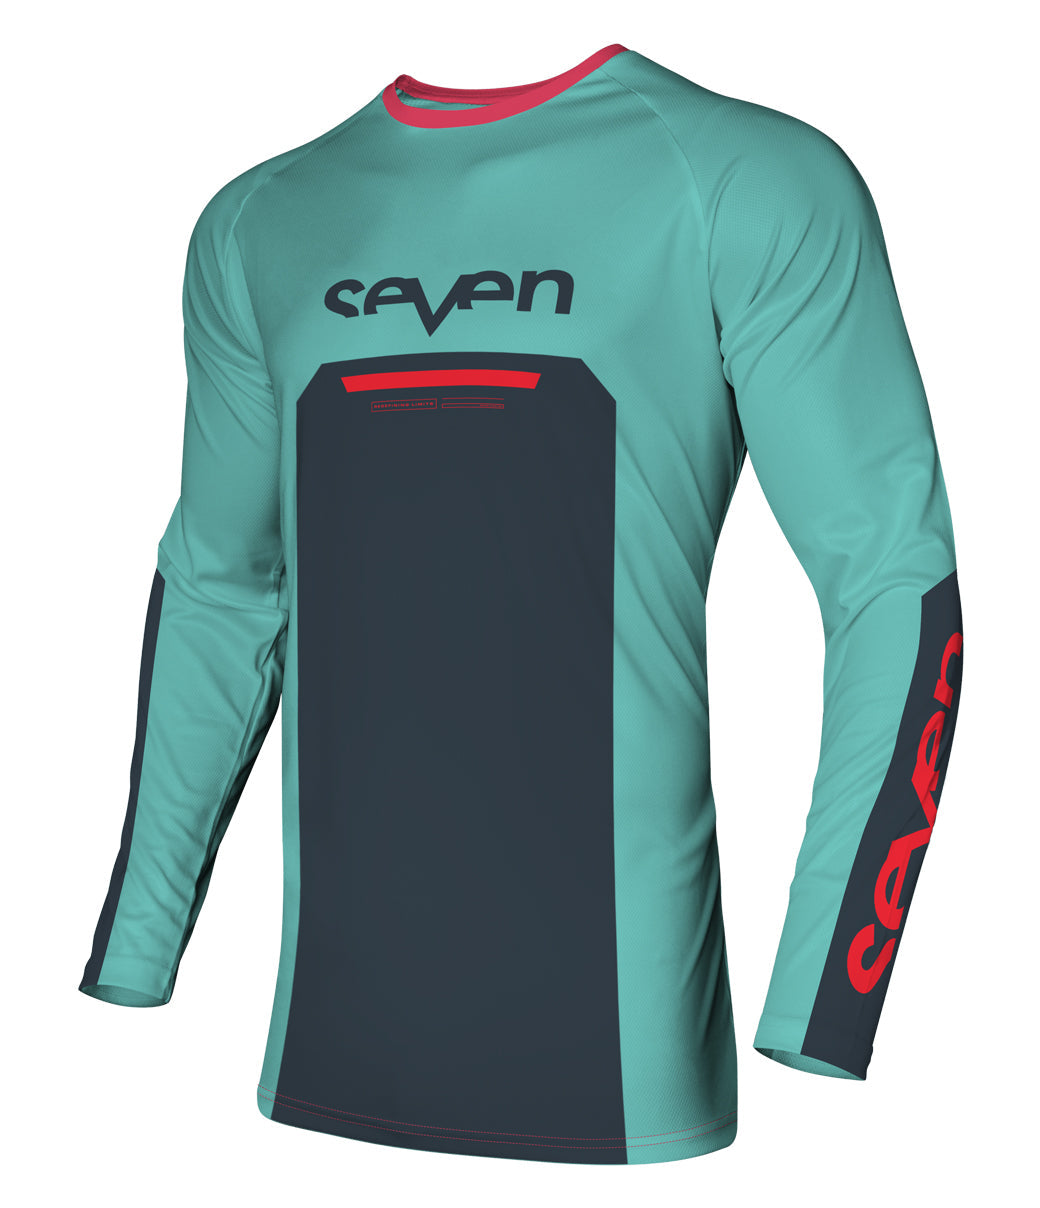 Youth Vox Phaser Jersey- Aruba